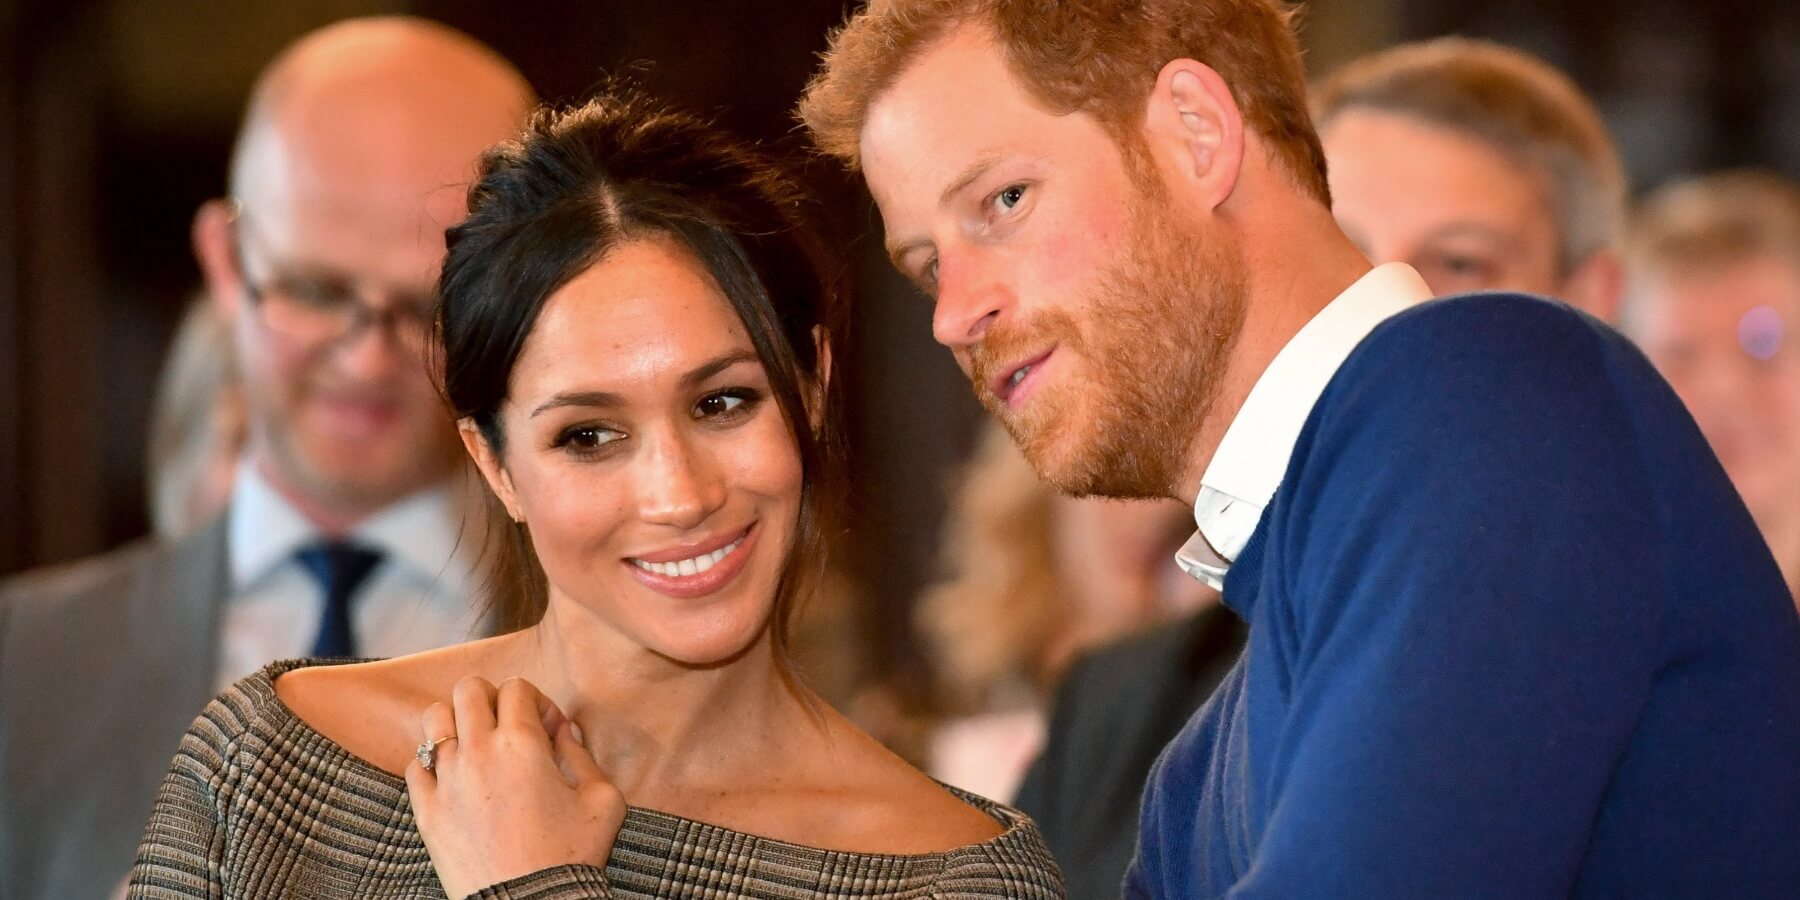 Meghan Markle and Prince Harry pose together as they watch a dance performance by Jukebox Collective in the banqueting hall during a visit to Cardiff Castle on January 18, 2018 in Cardiff, Wales.